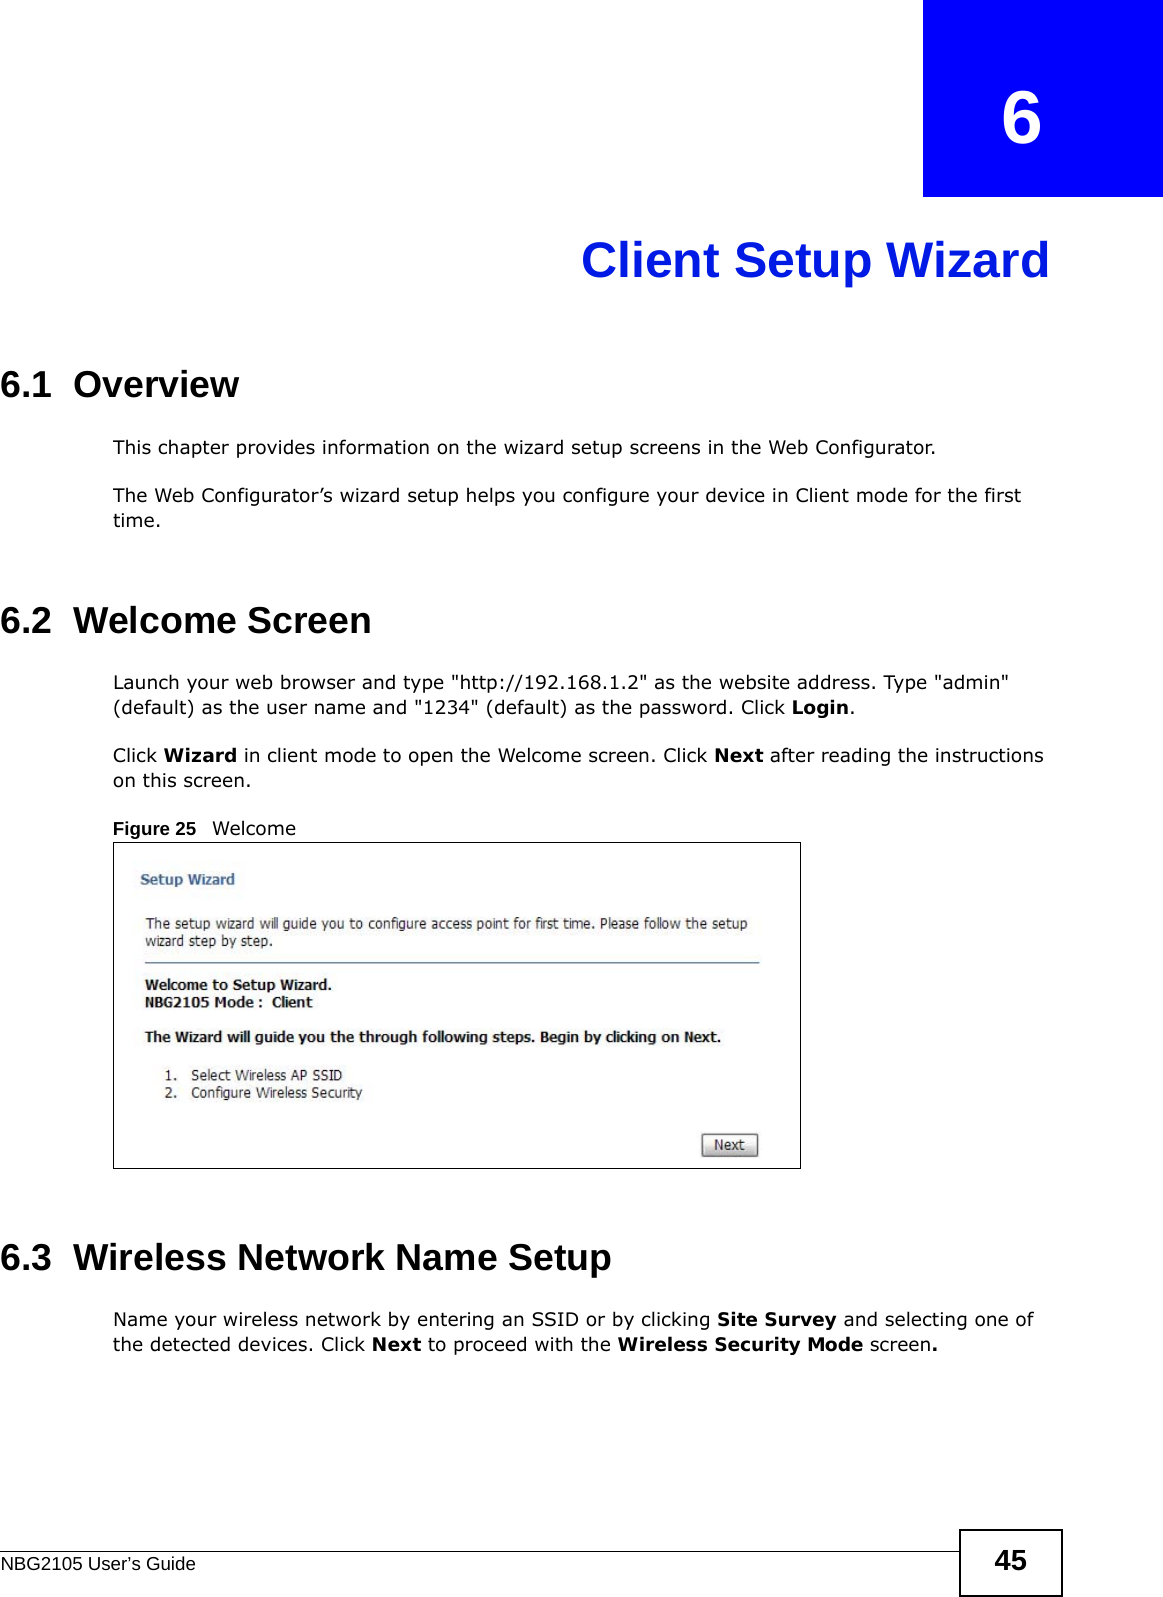 NBG2105 User’s Guide 45CHAPTER   6Client Setup Wizard6.1  OverviewThis chapter provides information on the wizard setup screens in the Web Configurator.The Web Configurator’s wizard setup helps you configure your device in Client mode for the first time.6.2  Welcome ScreenLaunch your web browser and type &quot;http://192.168.1.2&quot; as the website address. Type &quot;admin&quot; (default) as the user name and &quot;1234&quot; (default) as the password. Click Login.Click Wizard in client mode to open the Welcome screen. Click Next after reading the instructions on this screen.Figure 25   Welcome 6.3  Wireless Network Name SetupName your wireless network by entering an SSID or by clicking Site Survey and selecting one of the detected devices. Click Next to proceed with the Wireless Security Mode screen.